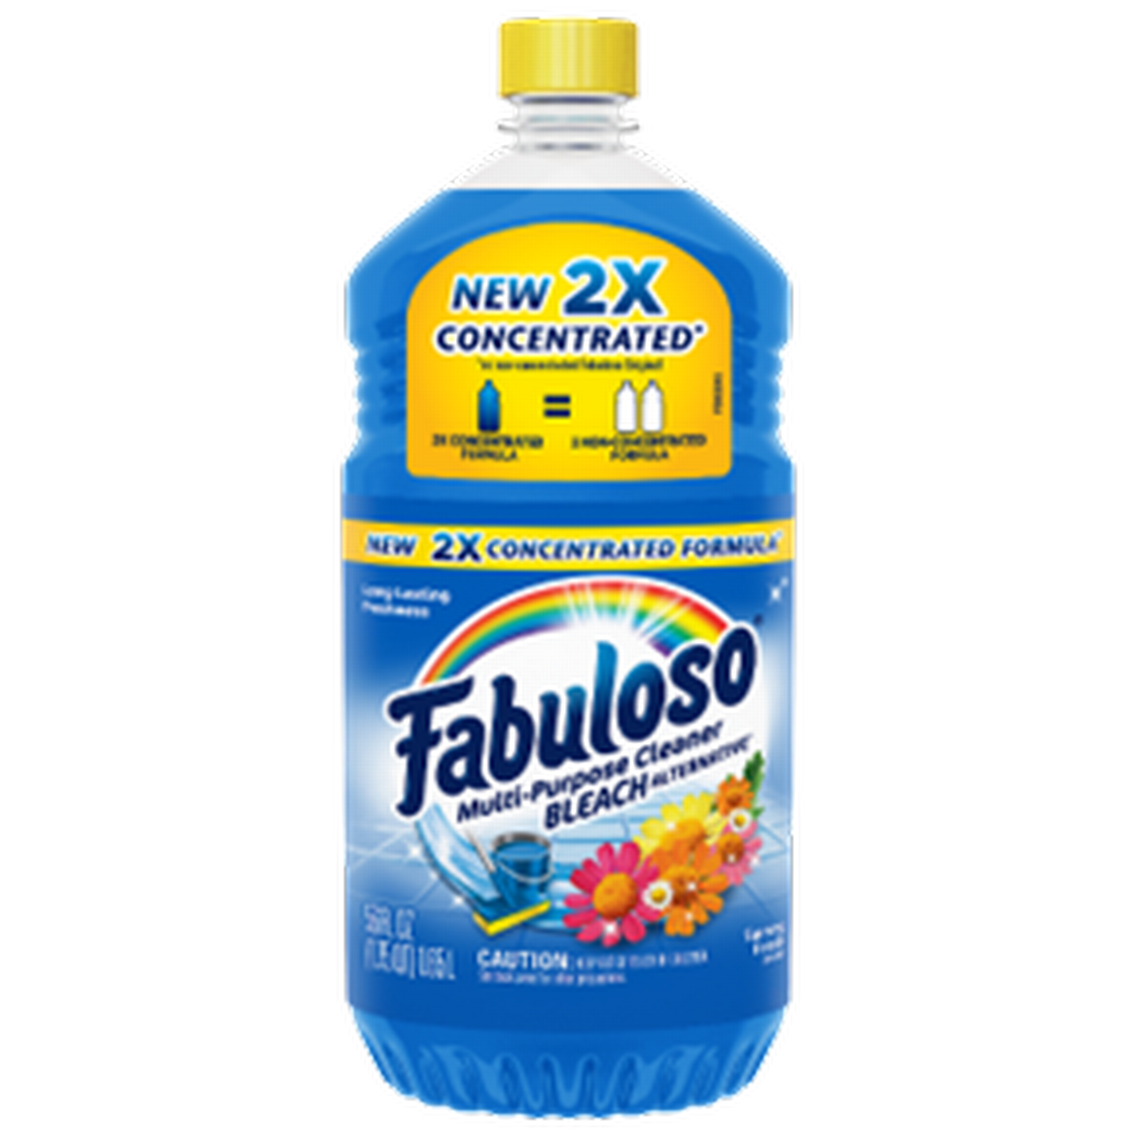 A 56-ounce bottle of Fabuloso Multi Purpose Cleaner Bleach Alternative 2X Concentrated Formula Spring Fresh Scent